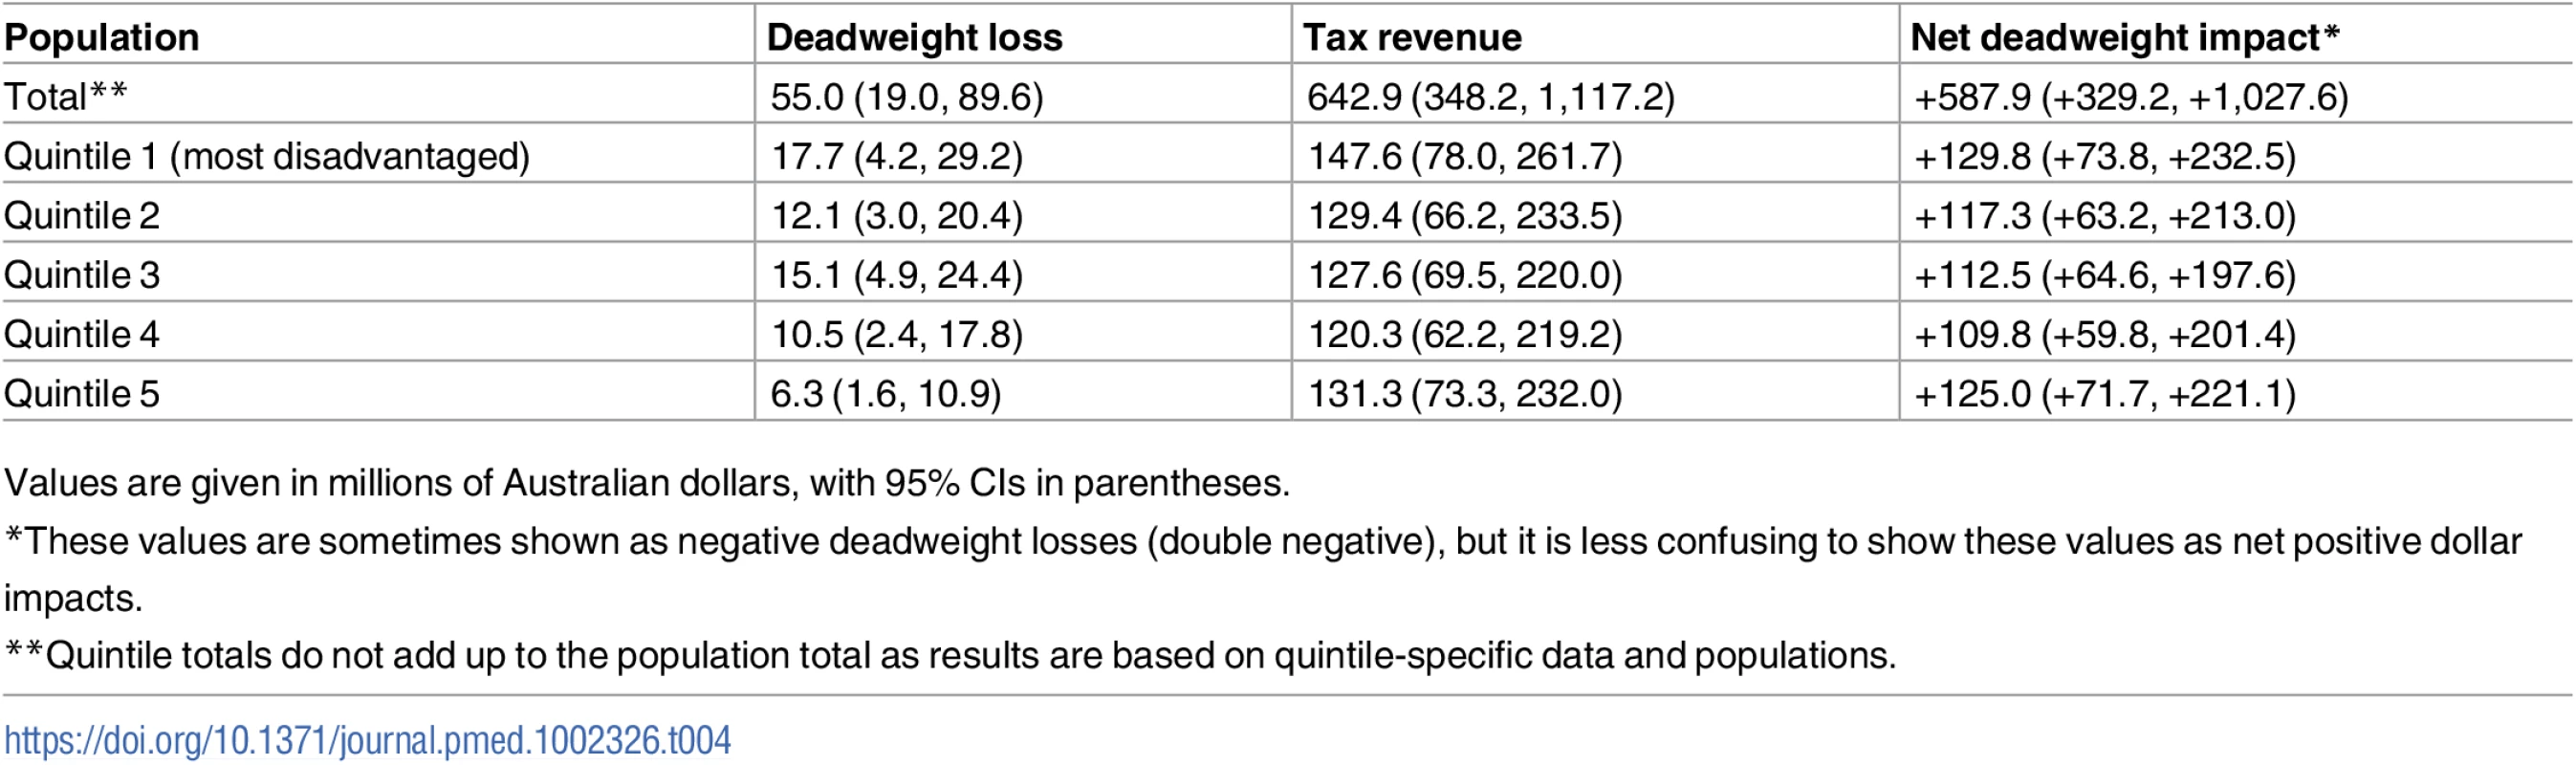 Estimated net deadweight impact of a 20% tax on sugar-sweetened beverages.